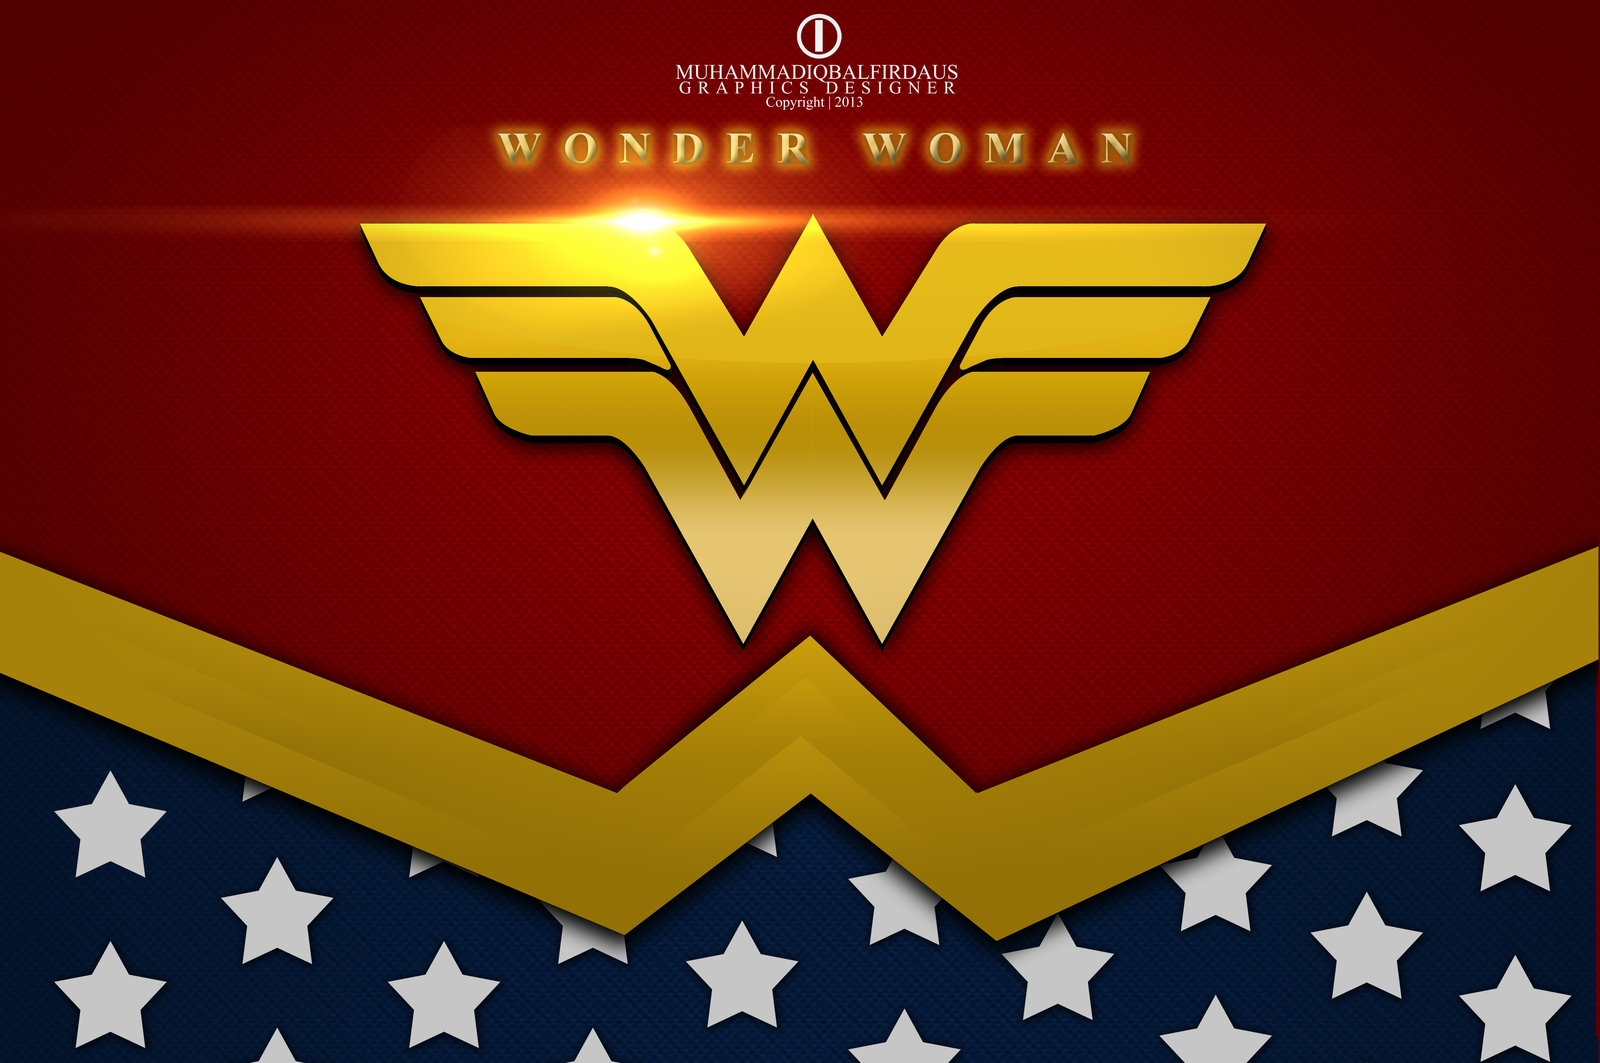 Wonder Woman download the last version for ios